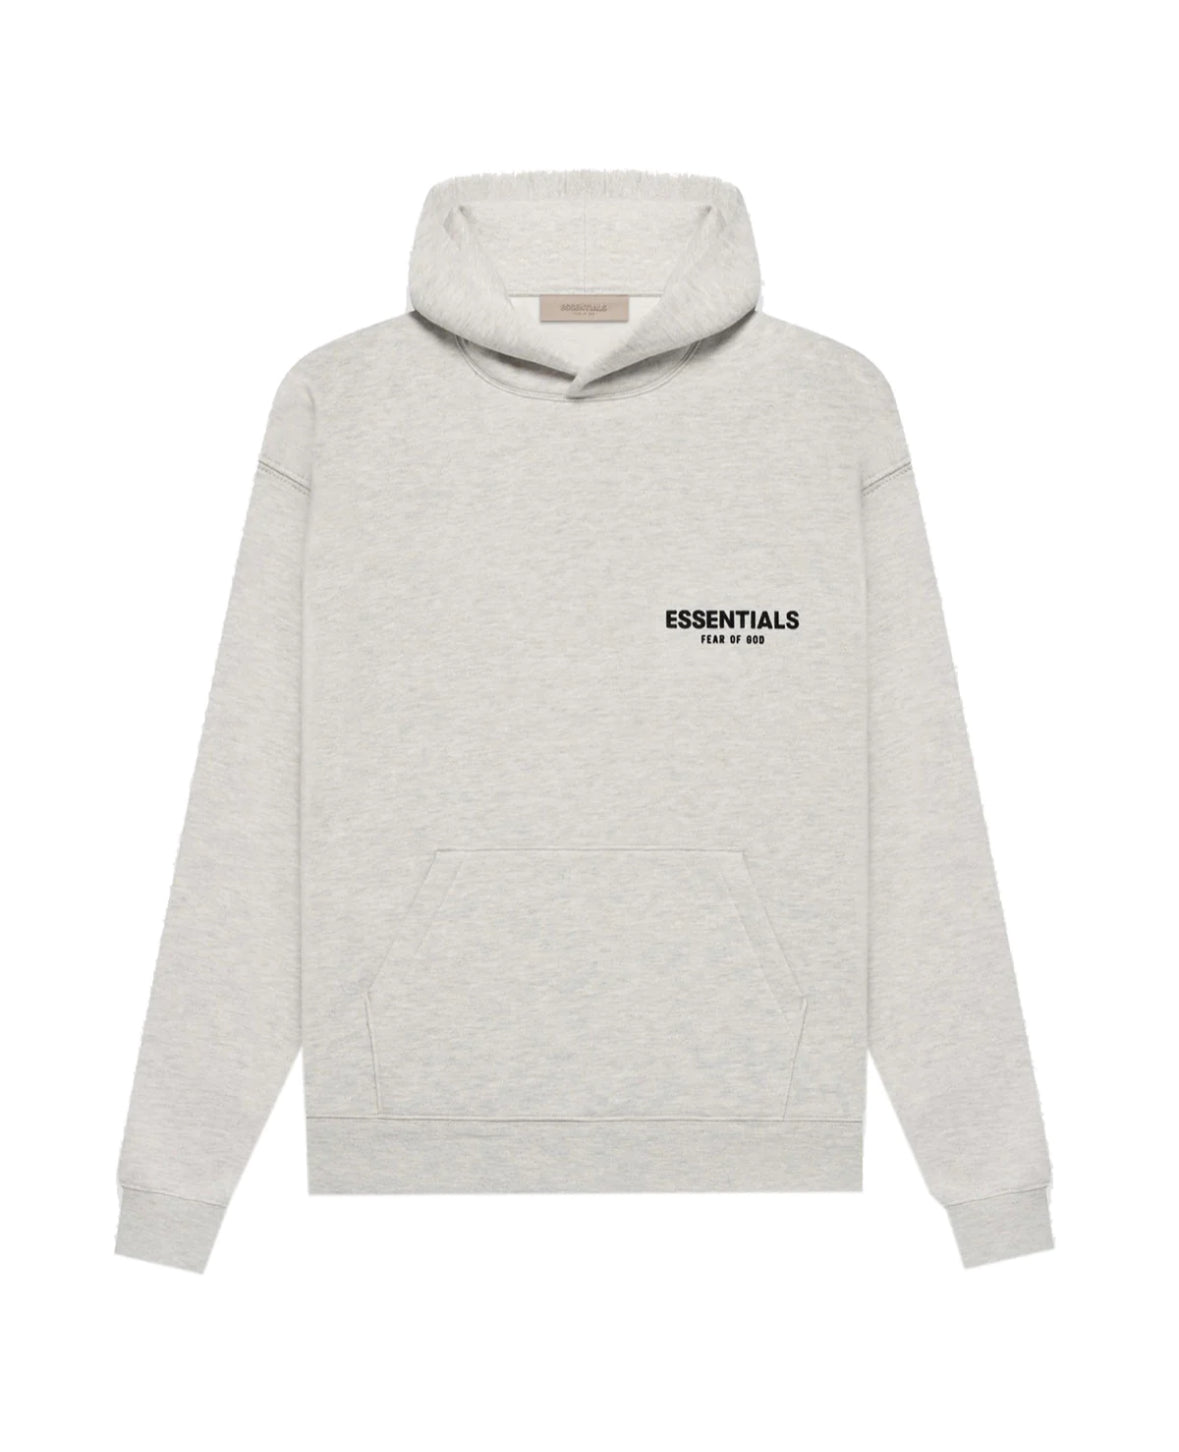 ESSENTIALS Hoodie                         Core collection